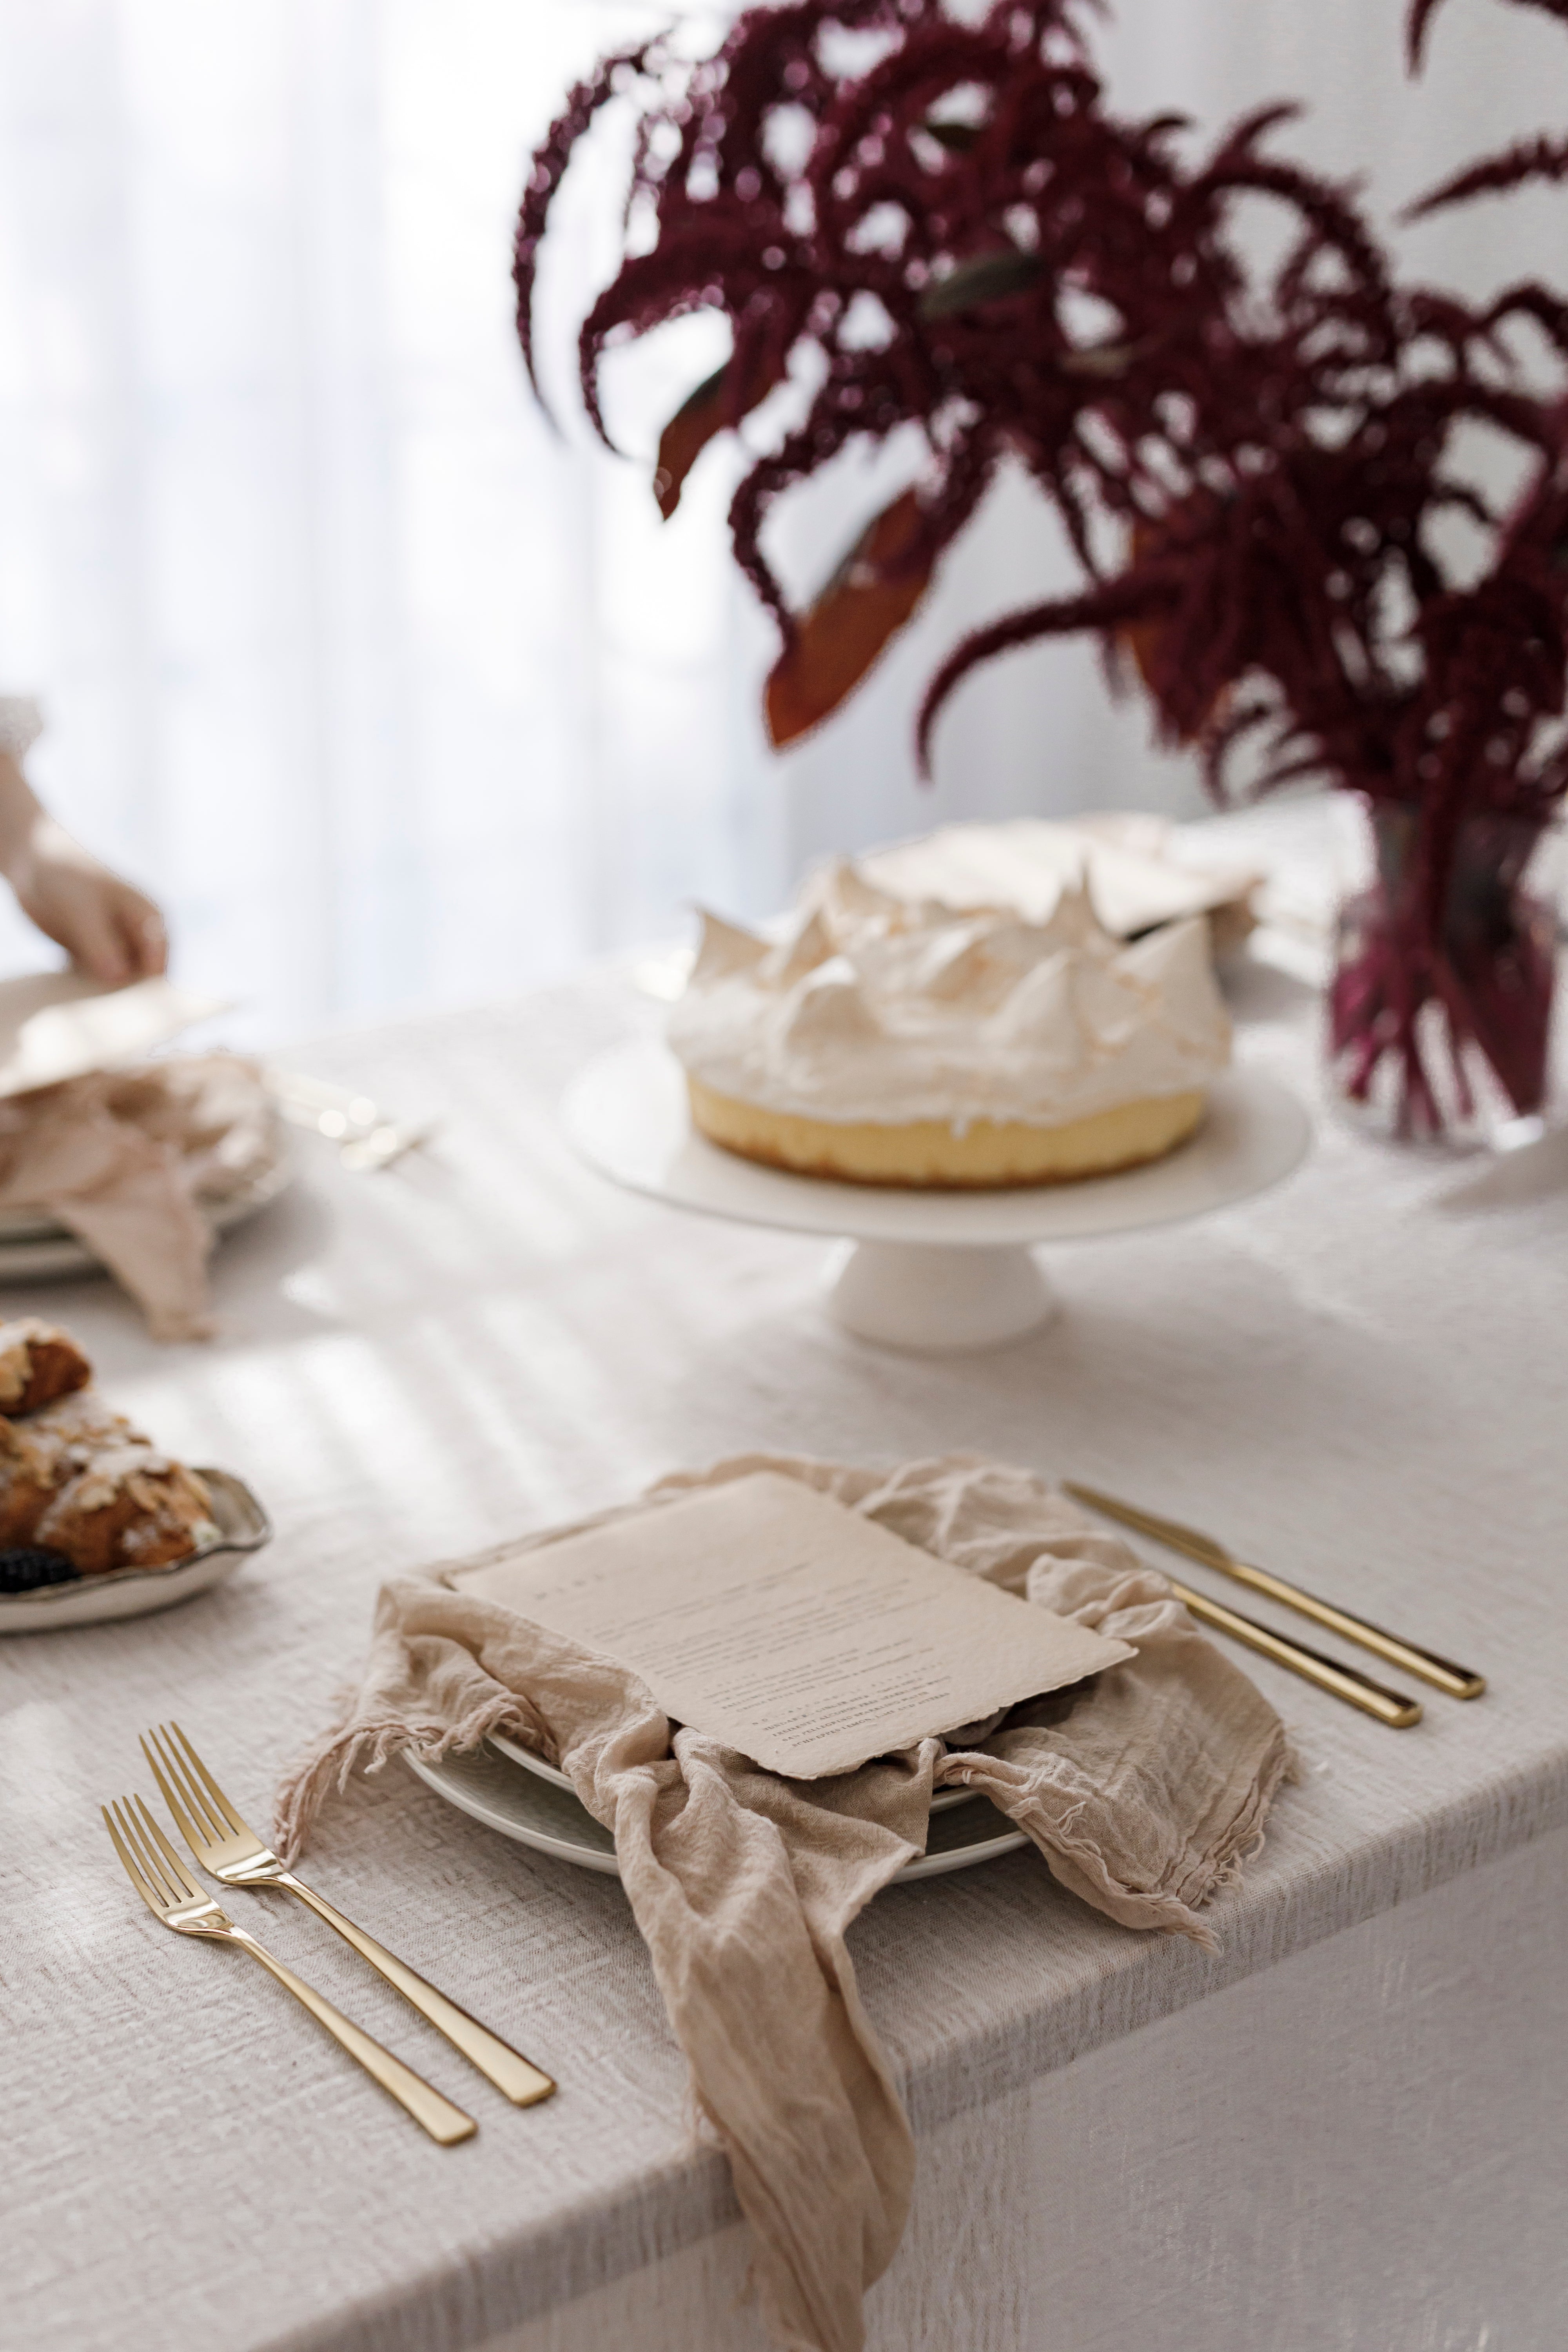 Ivory Textured Cotton Tablecloth - For Love & Living Australia